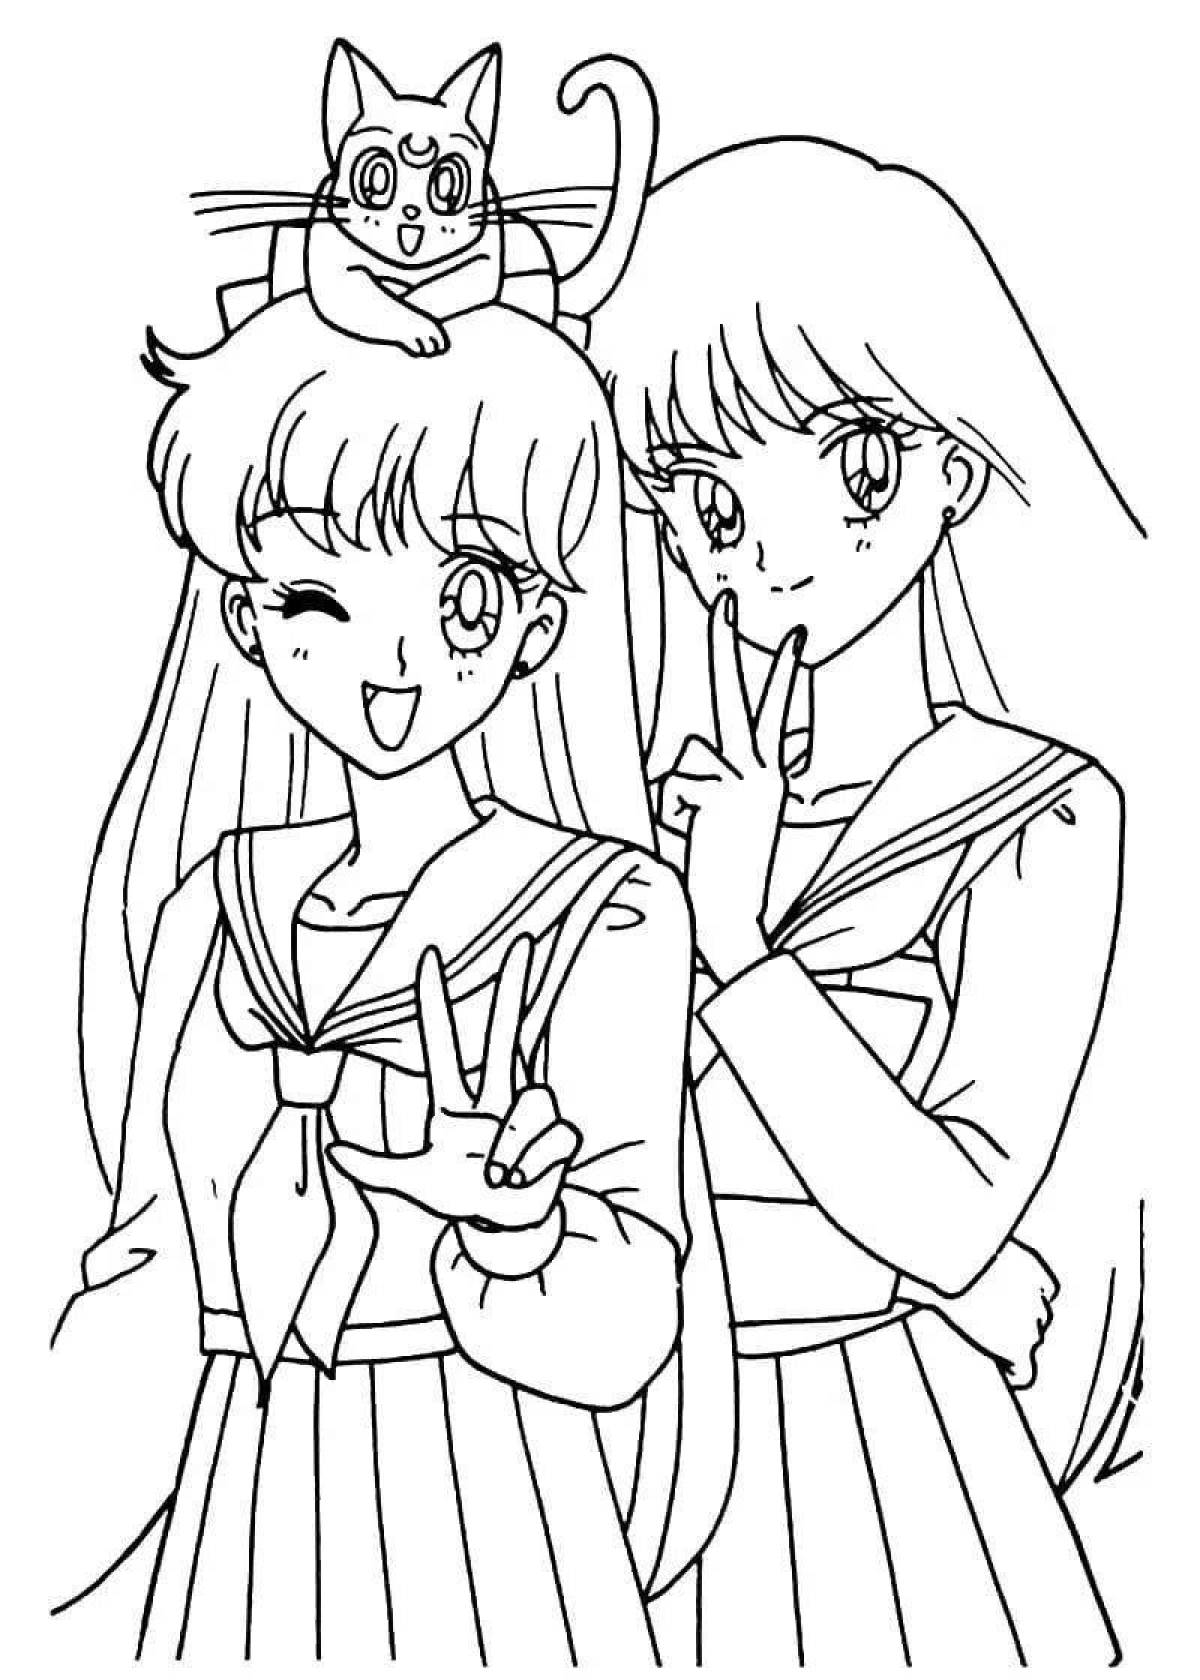 Sailor moon glitter coloring book for girls